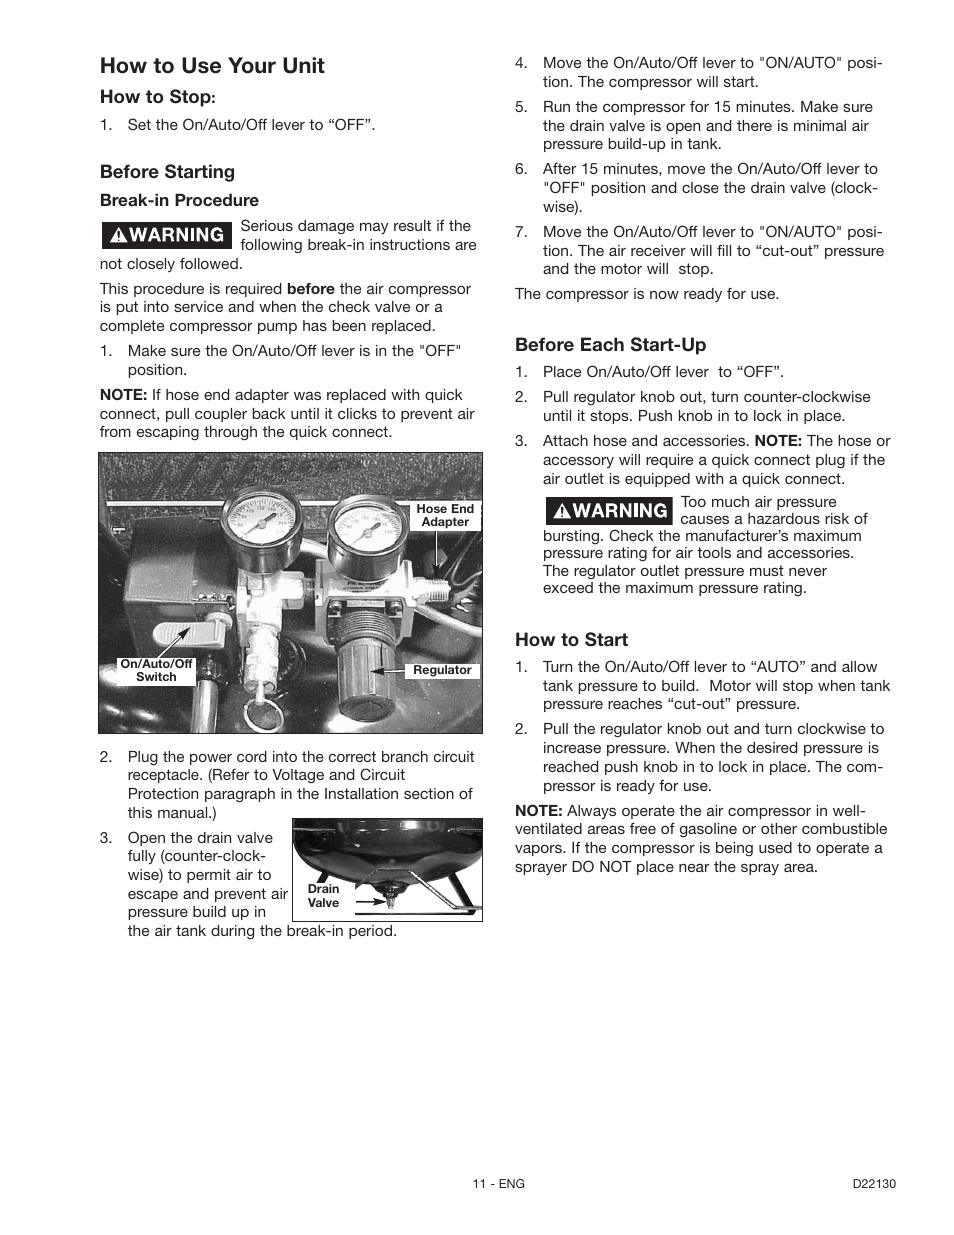 How to use your unit | Craftsman 919.16778 User Manual | Page 11 / 36